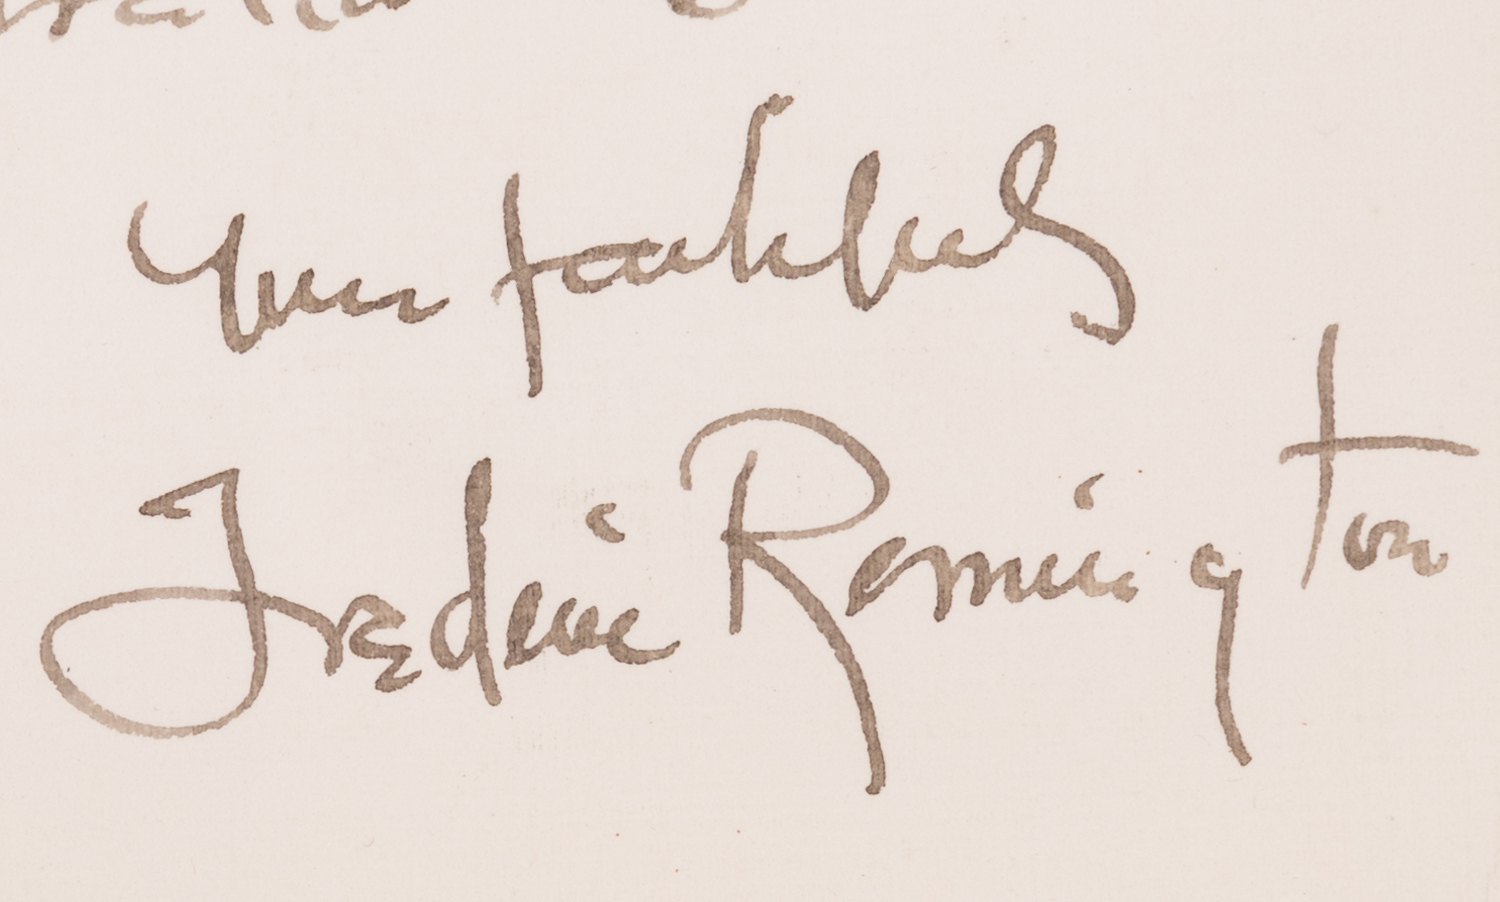 Lot 457: Frederic Remington Letter & Book, 2 items